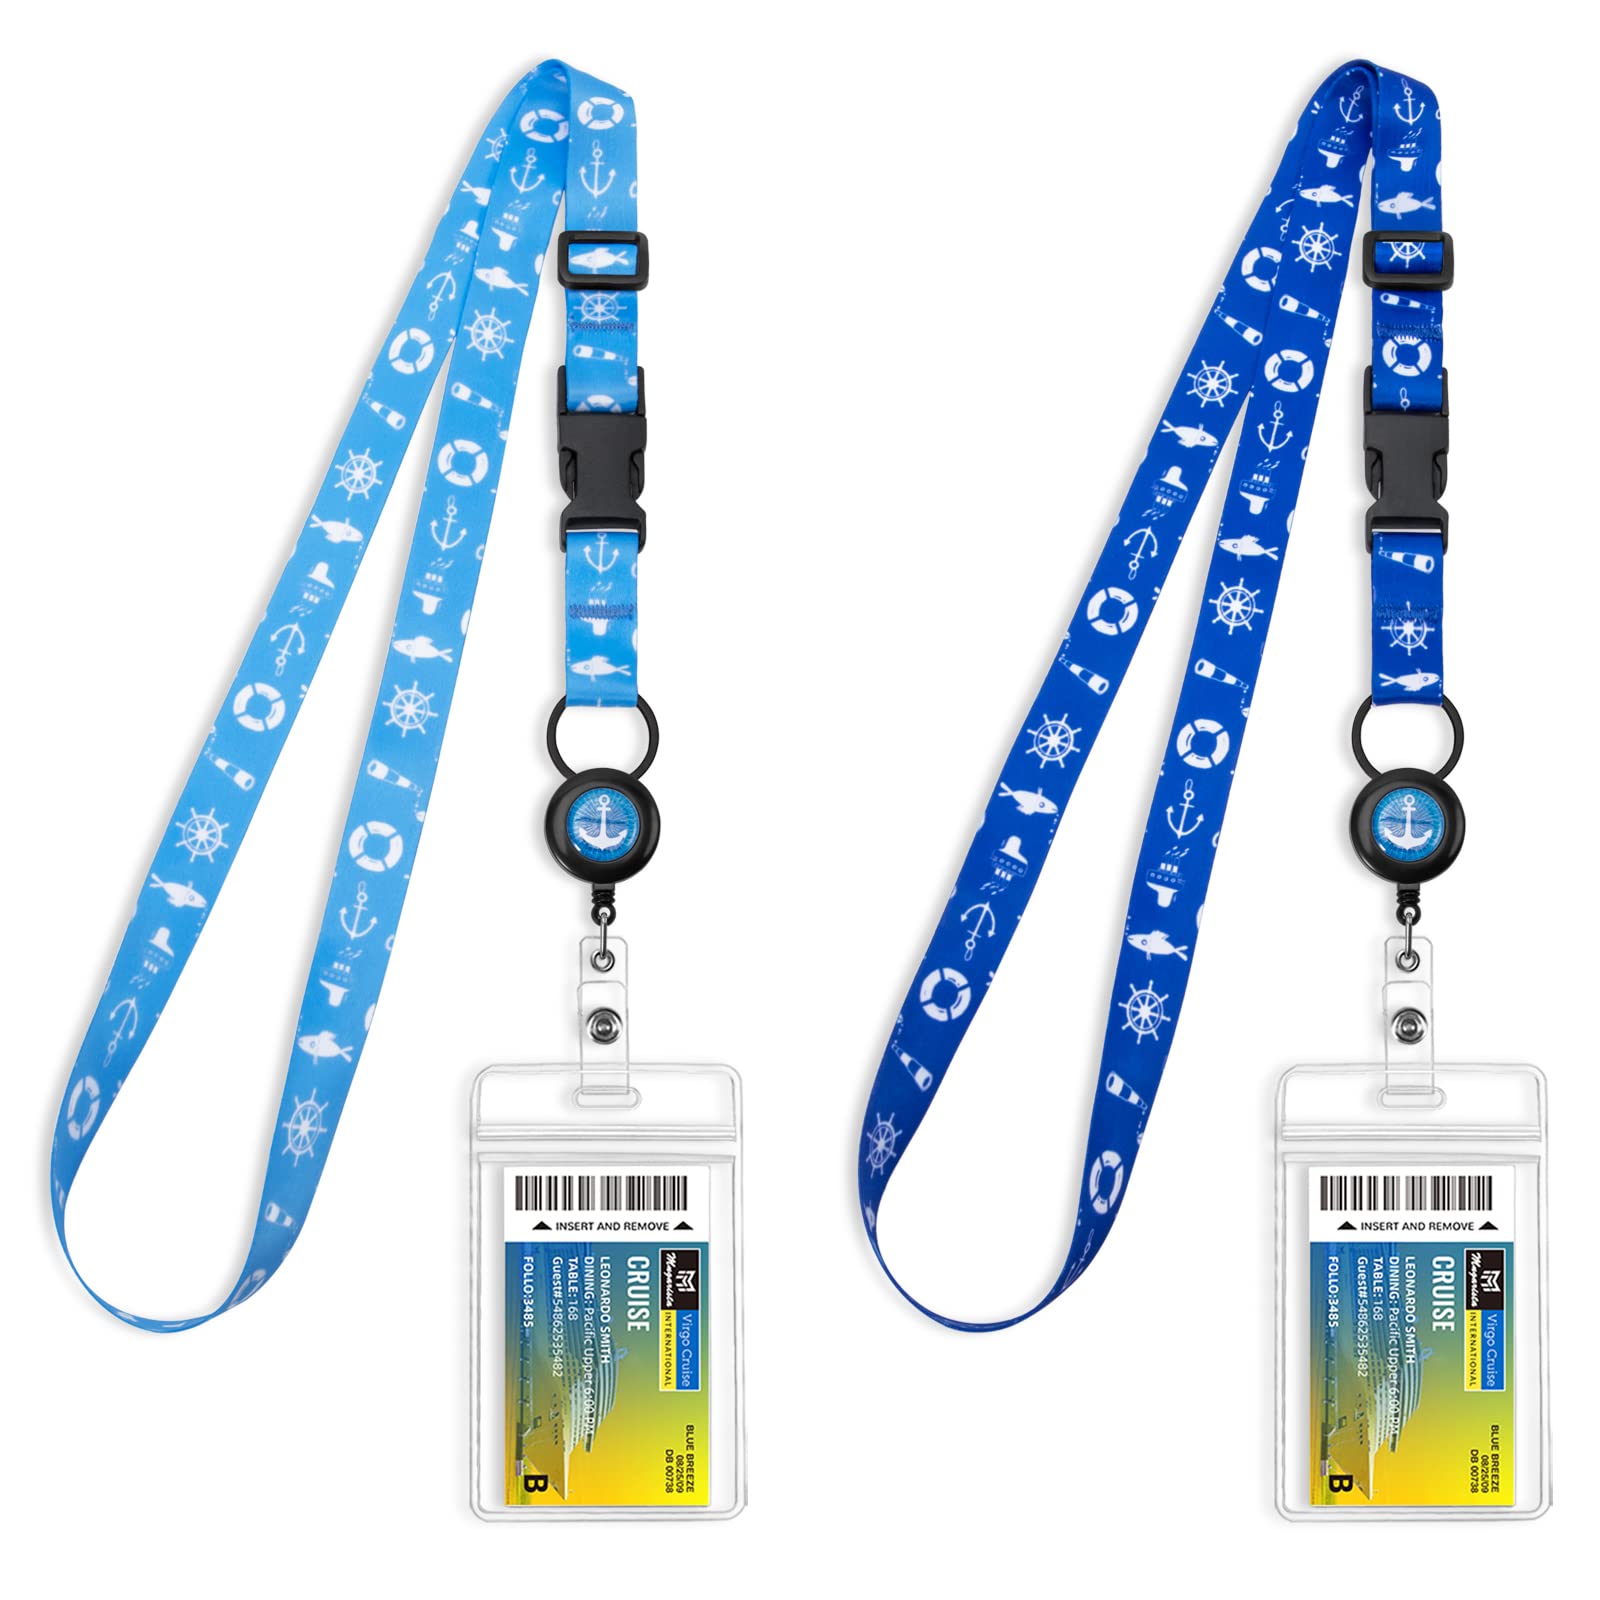 Book Cover Cruise Lanyards, Adjustable Lanyard with Retractable Reel, Waterproof ID Badge Holder for All Cruises Ships Key Cards, 2pack â€¦